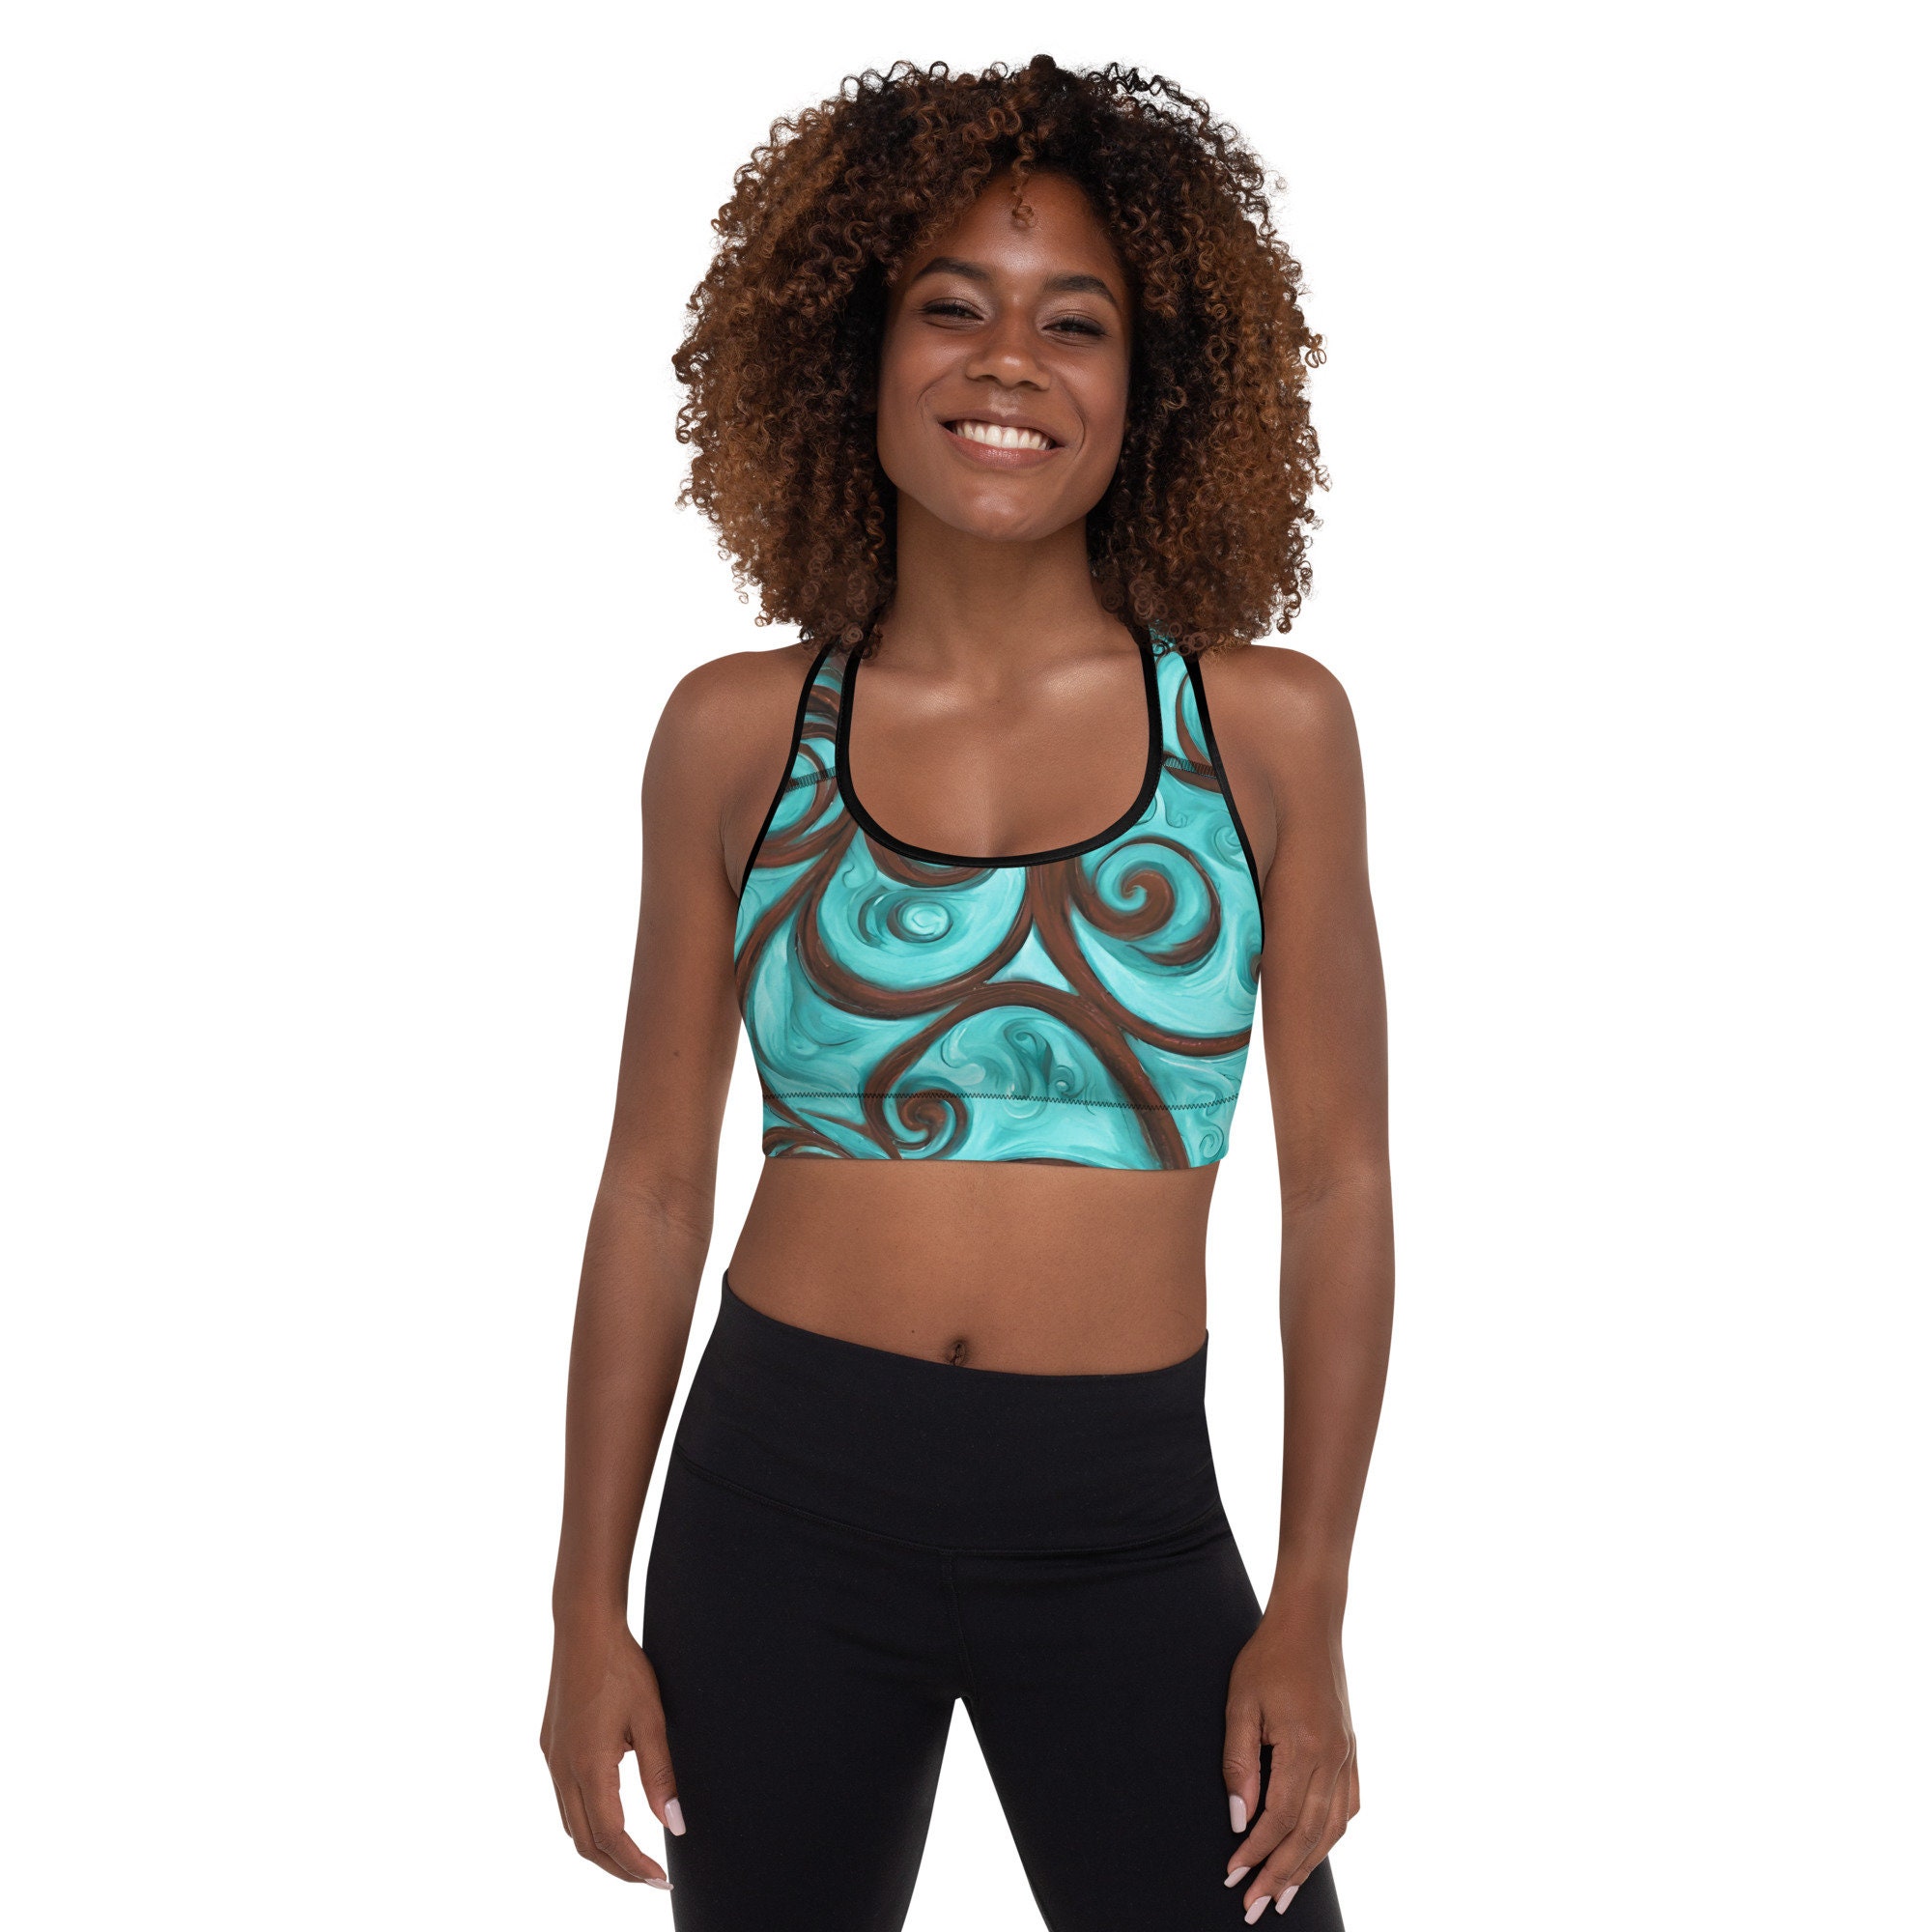 Buy UNIQUEBELLA comfy outfits for women sexy 2 piece, Sports Bra